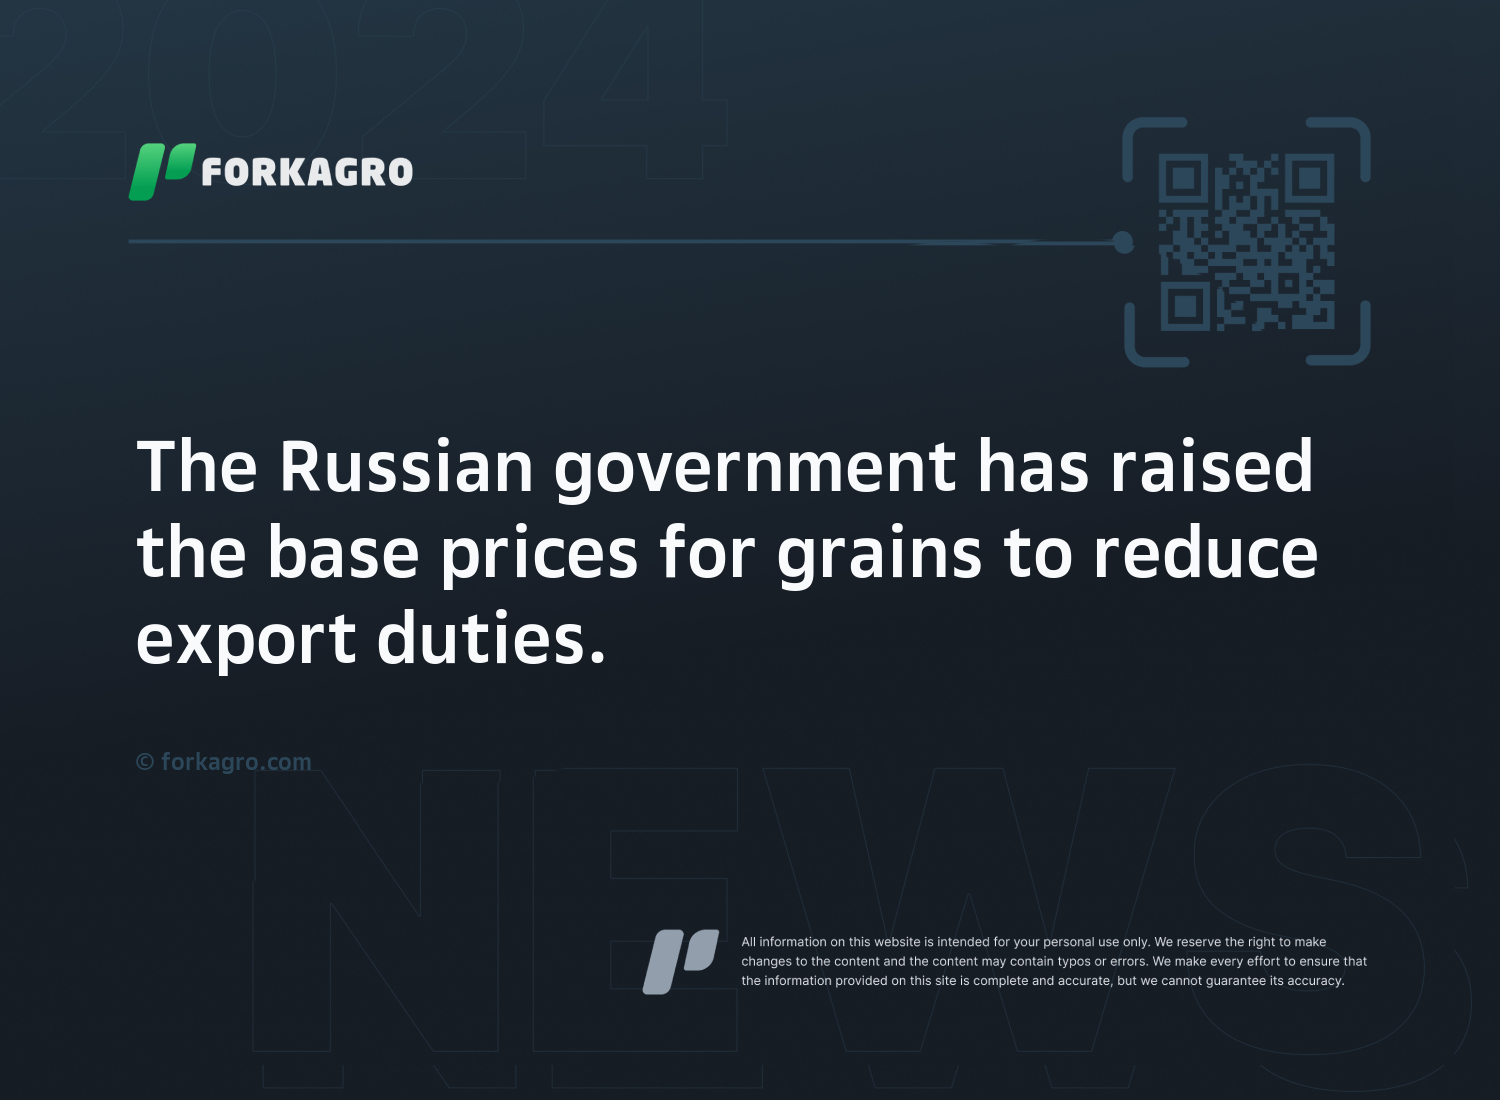 The Russian government has raised the base prices for grains to reduce export duties.